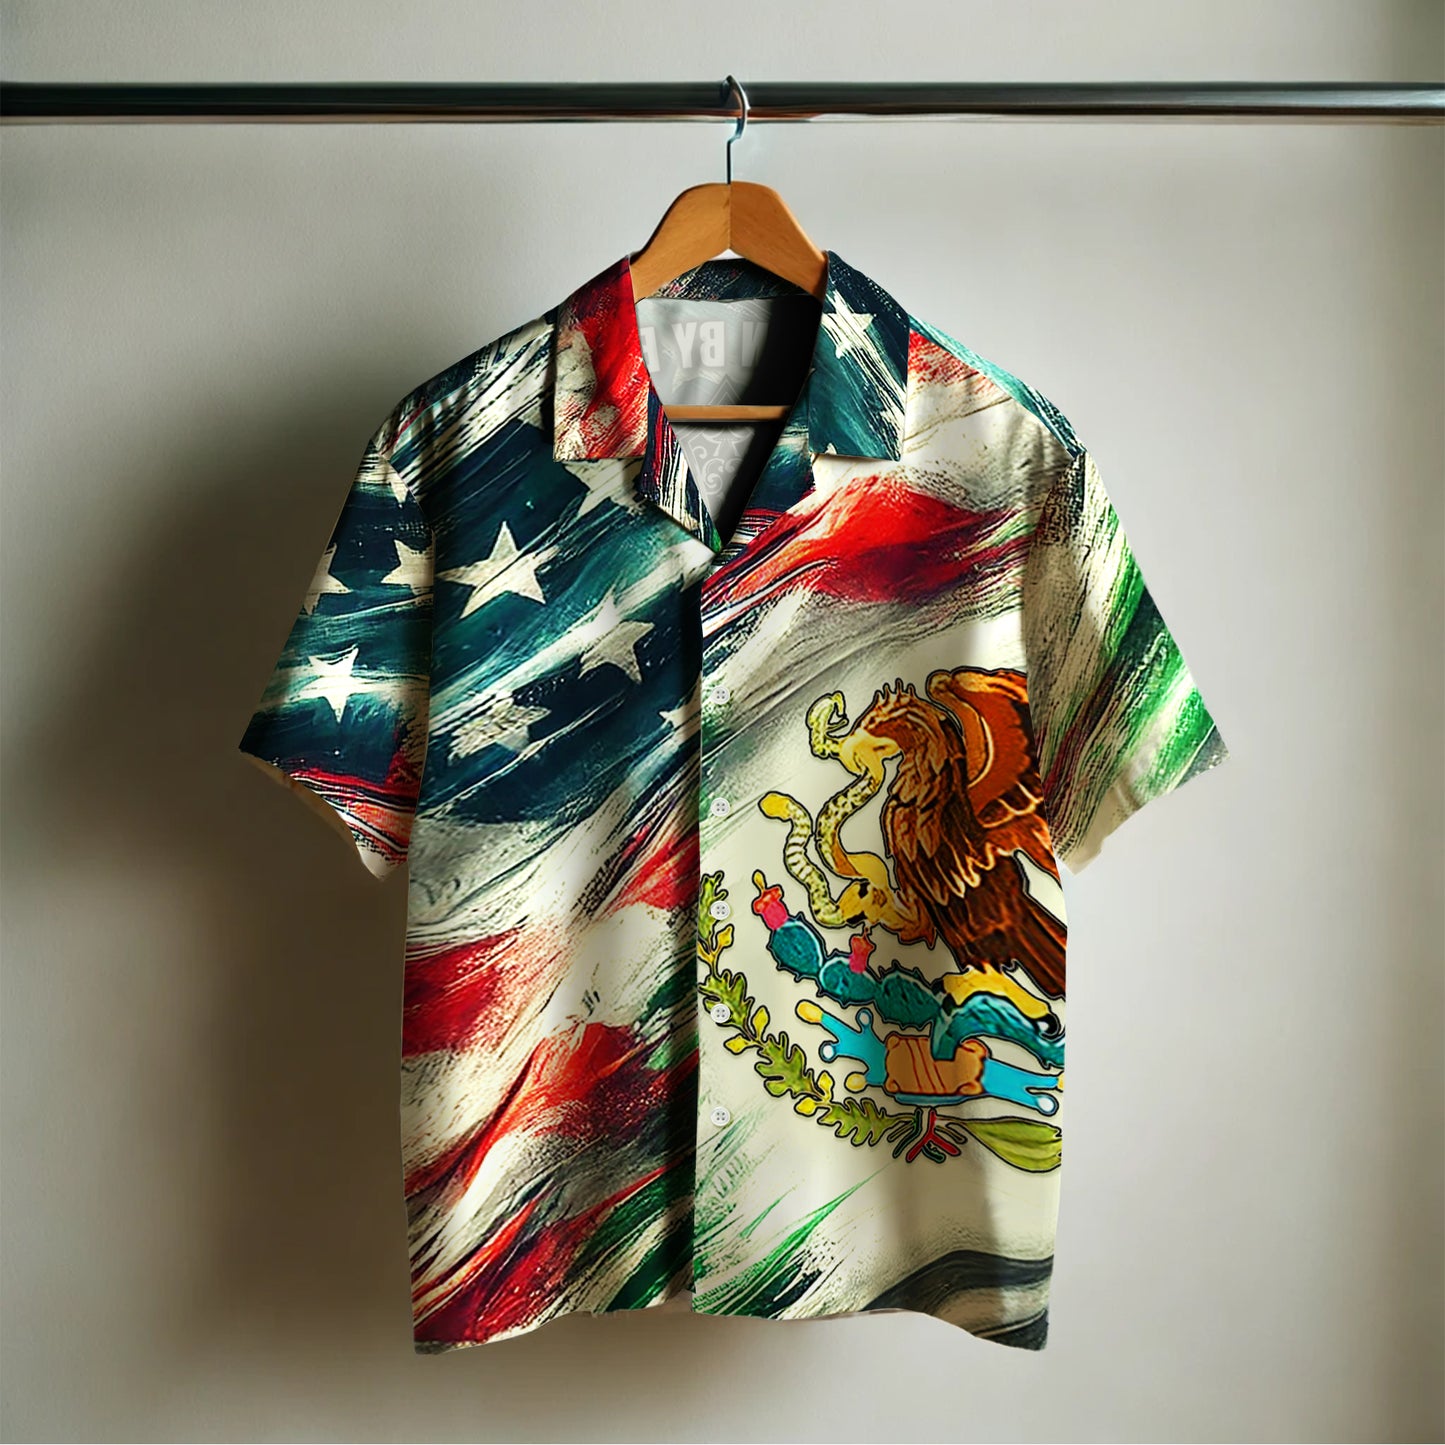 Mexican by blood, American by birth - Personalized Unisex Hawaiian Shirt - HW_MX53